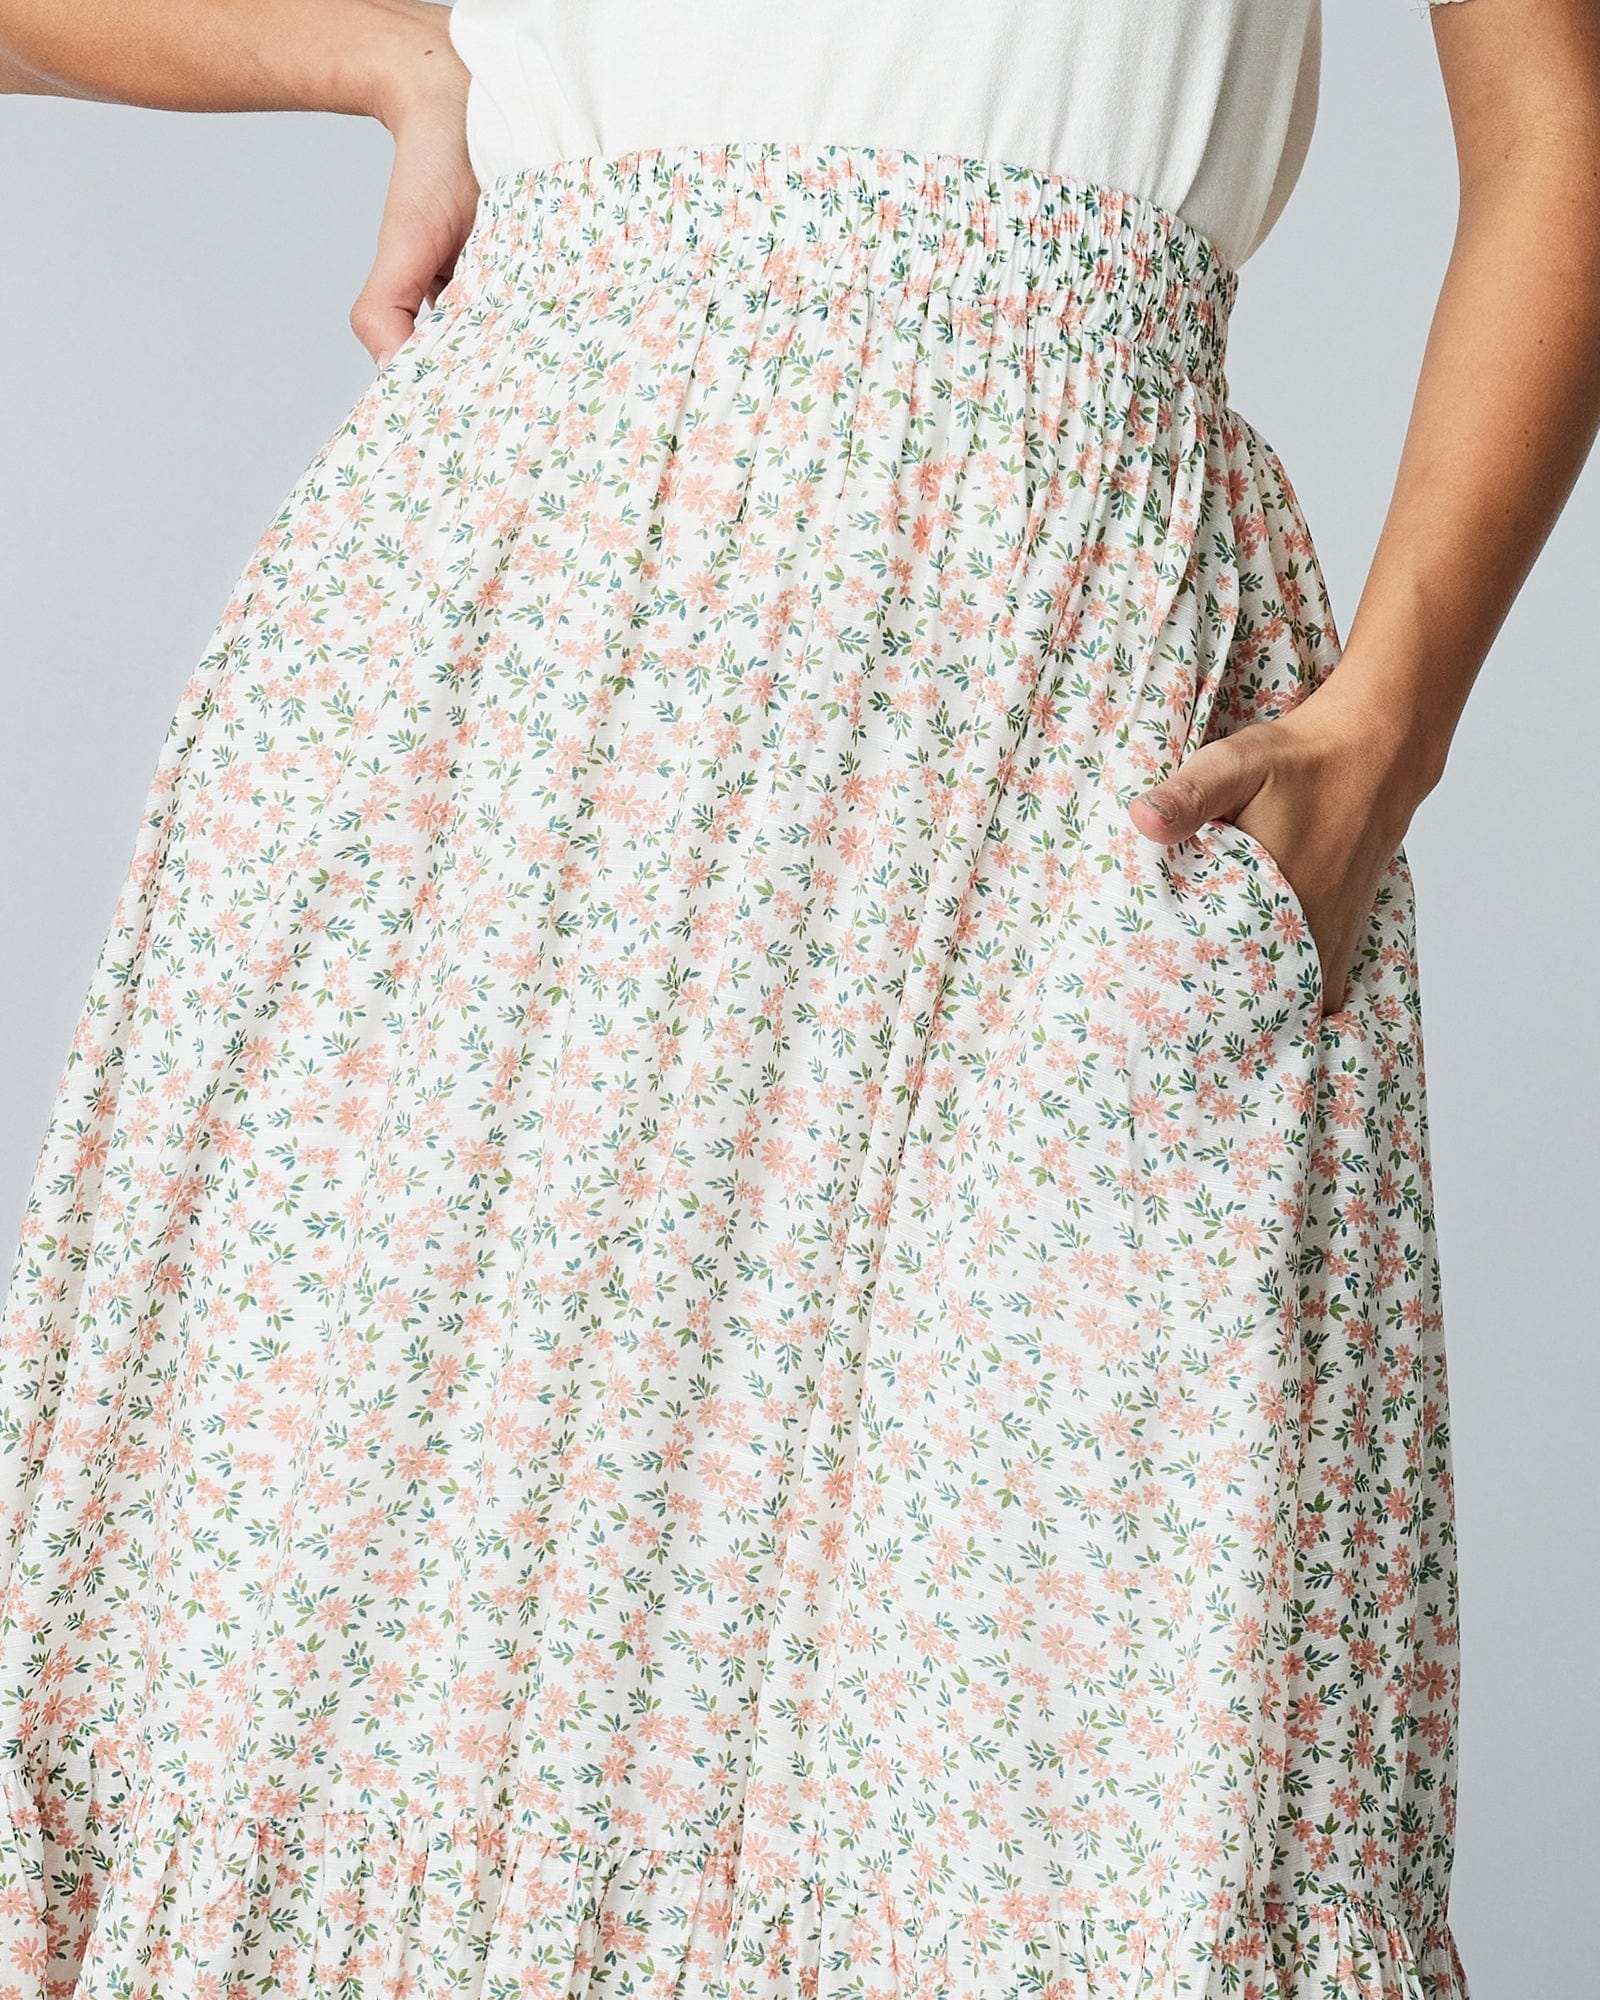 Woman in a maxi length, floral printed skirt